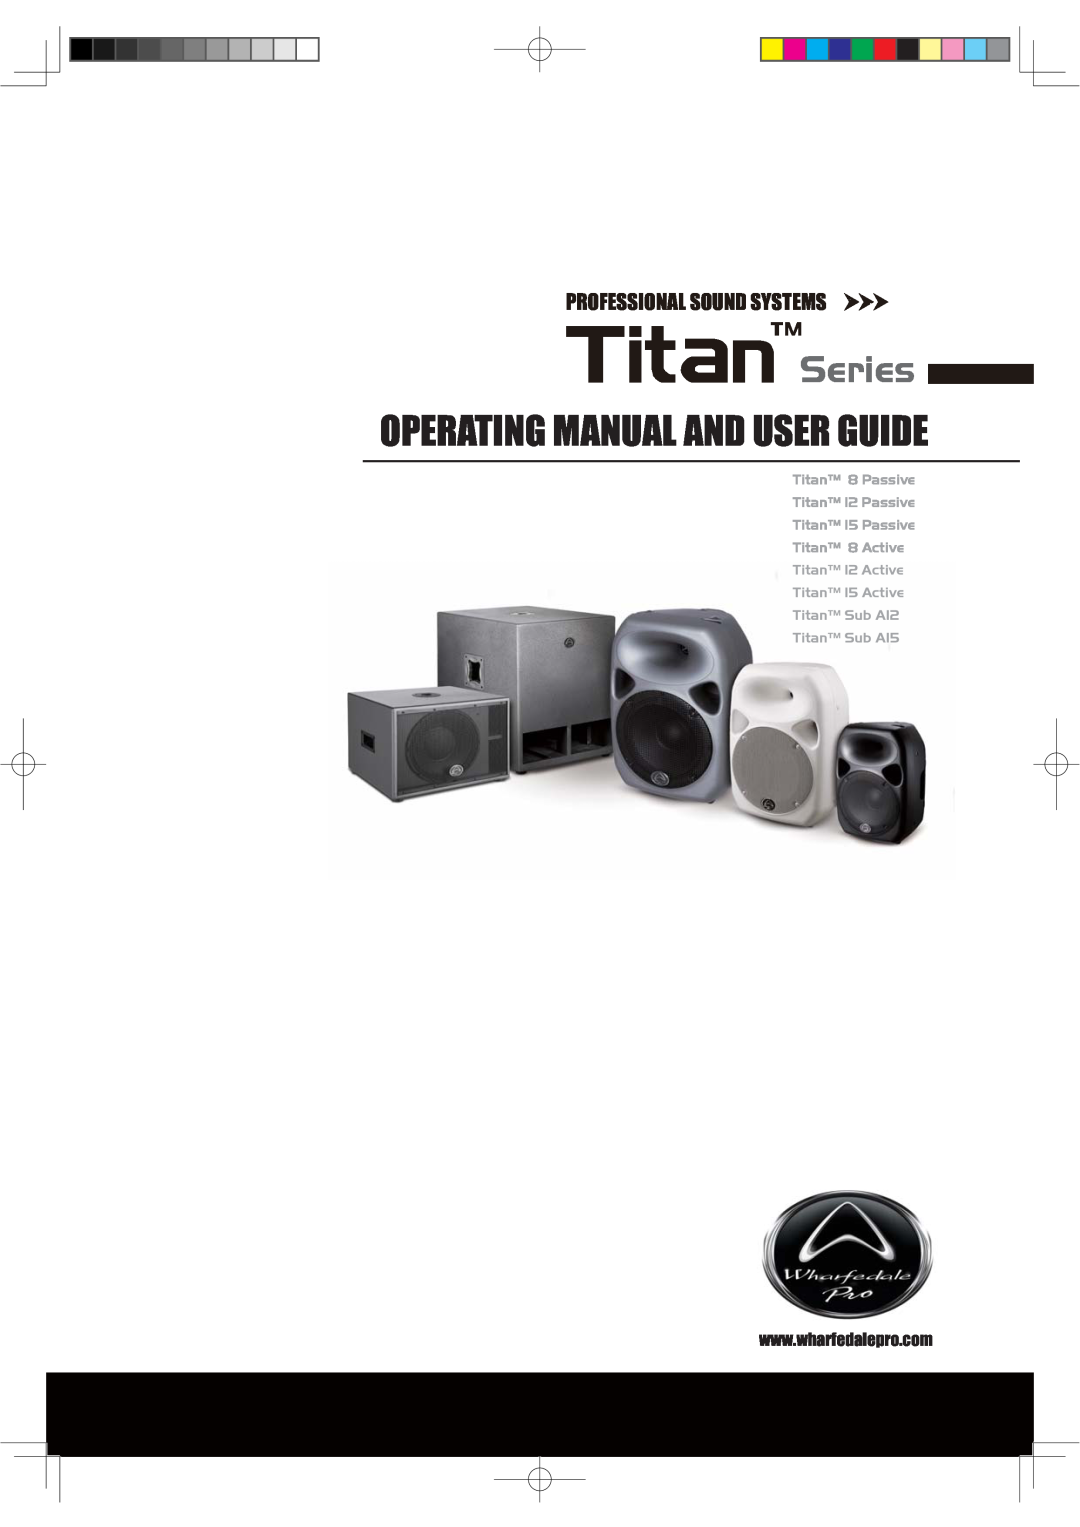 Wharfedale 15 PASSIVE, SUB A12, 12 PASSIVE manual Series, Operating Manual And User Guide, Professional Sound Systems 